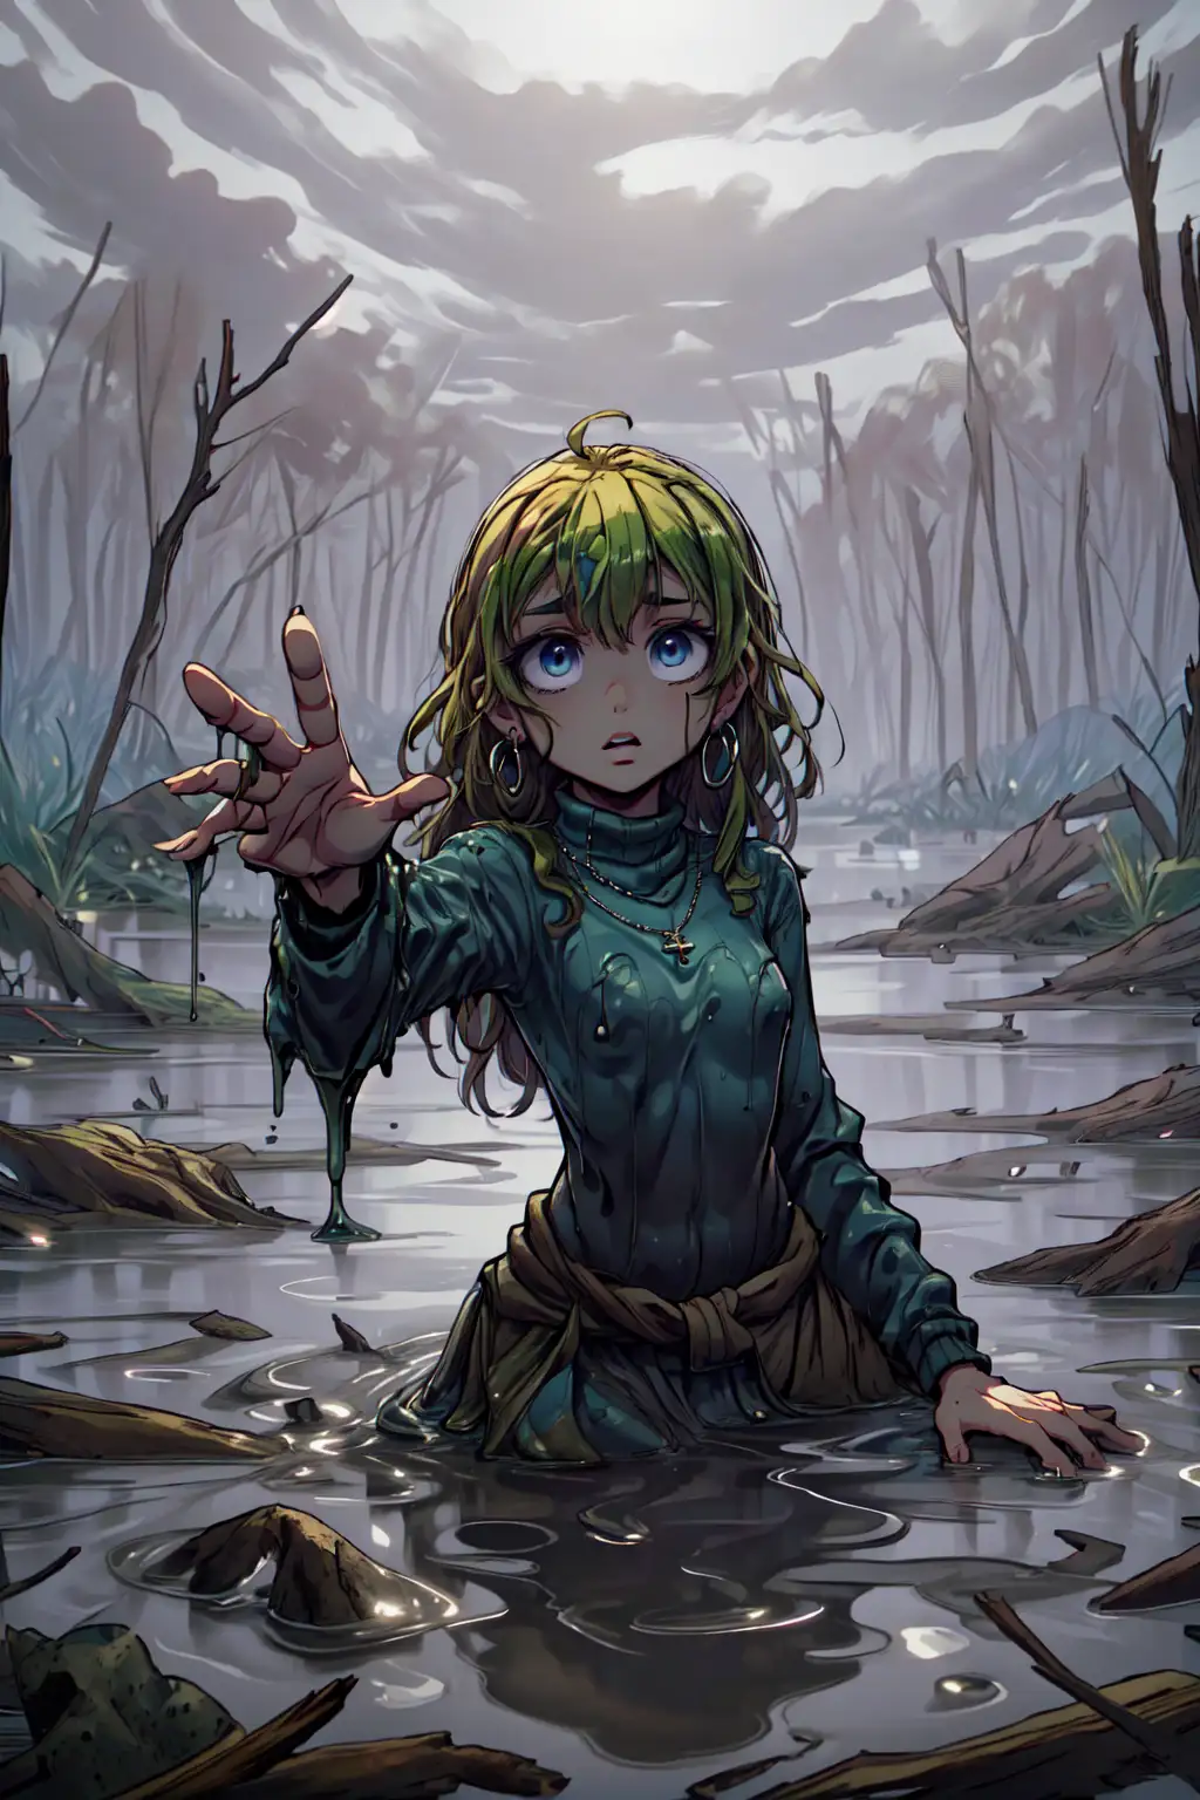 bottomless swamp image by slime77744784